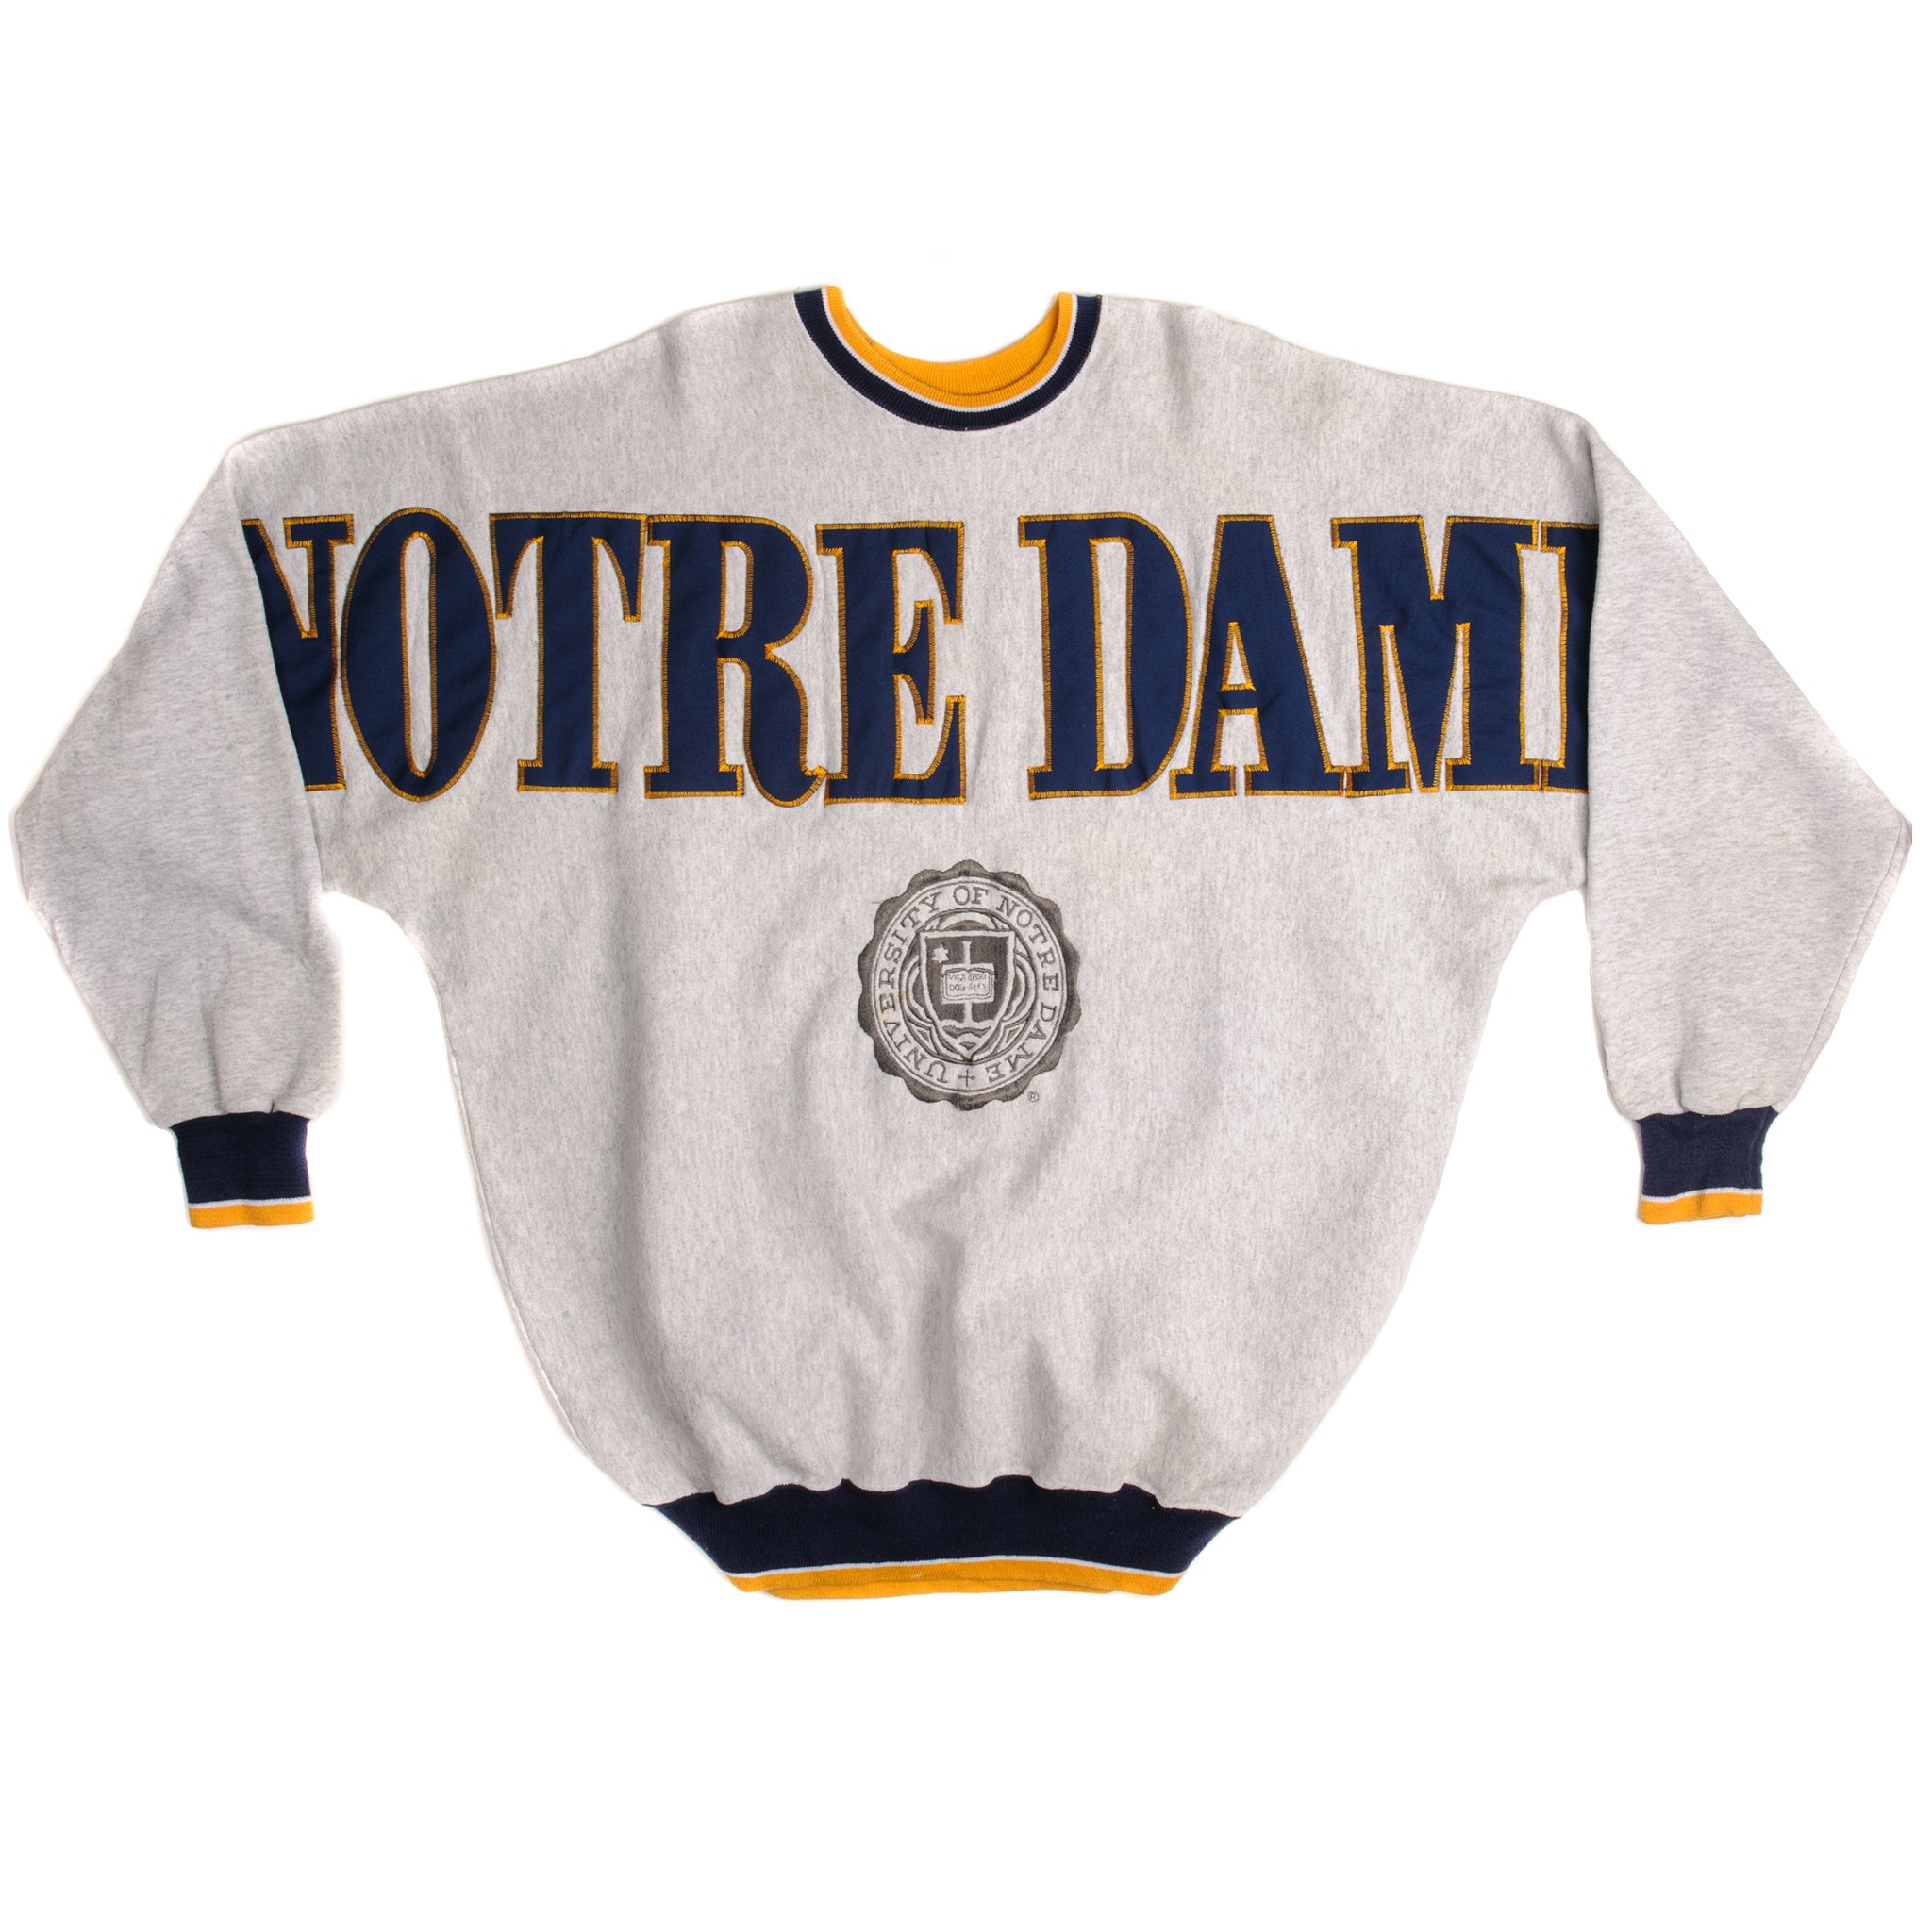 Vintage University of Notre Dame Sweatshirt Size 2XL Made in USA